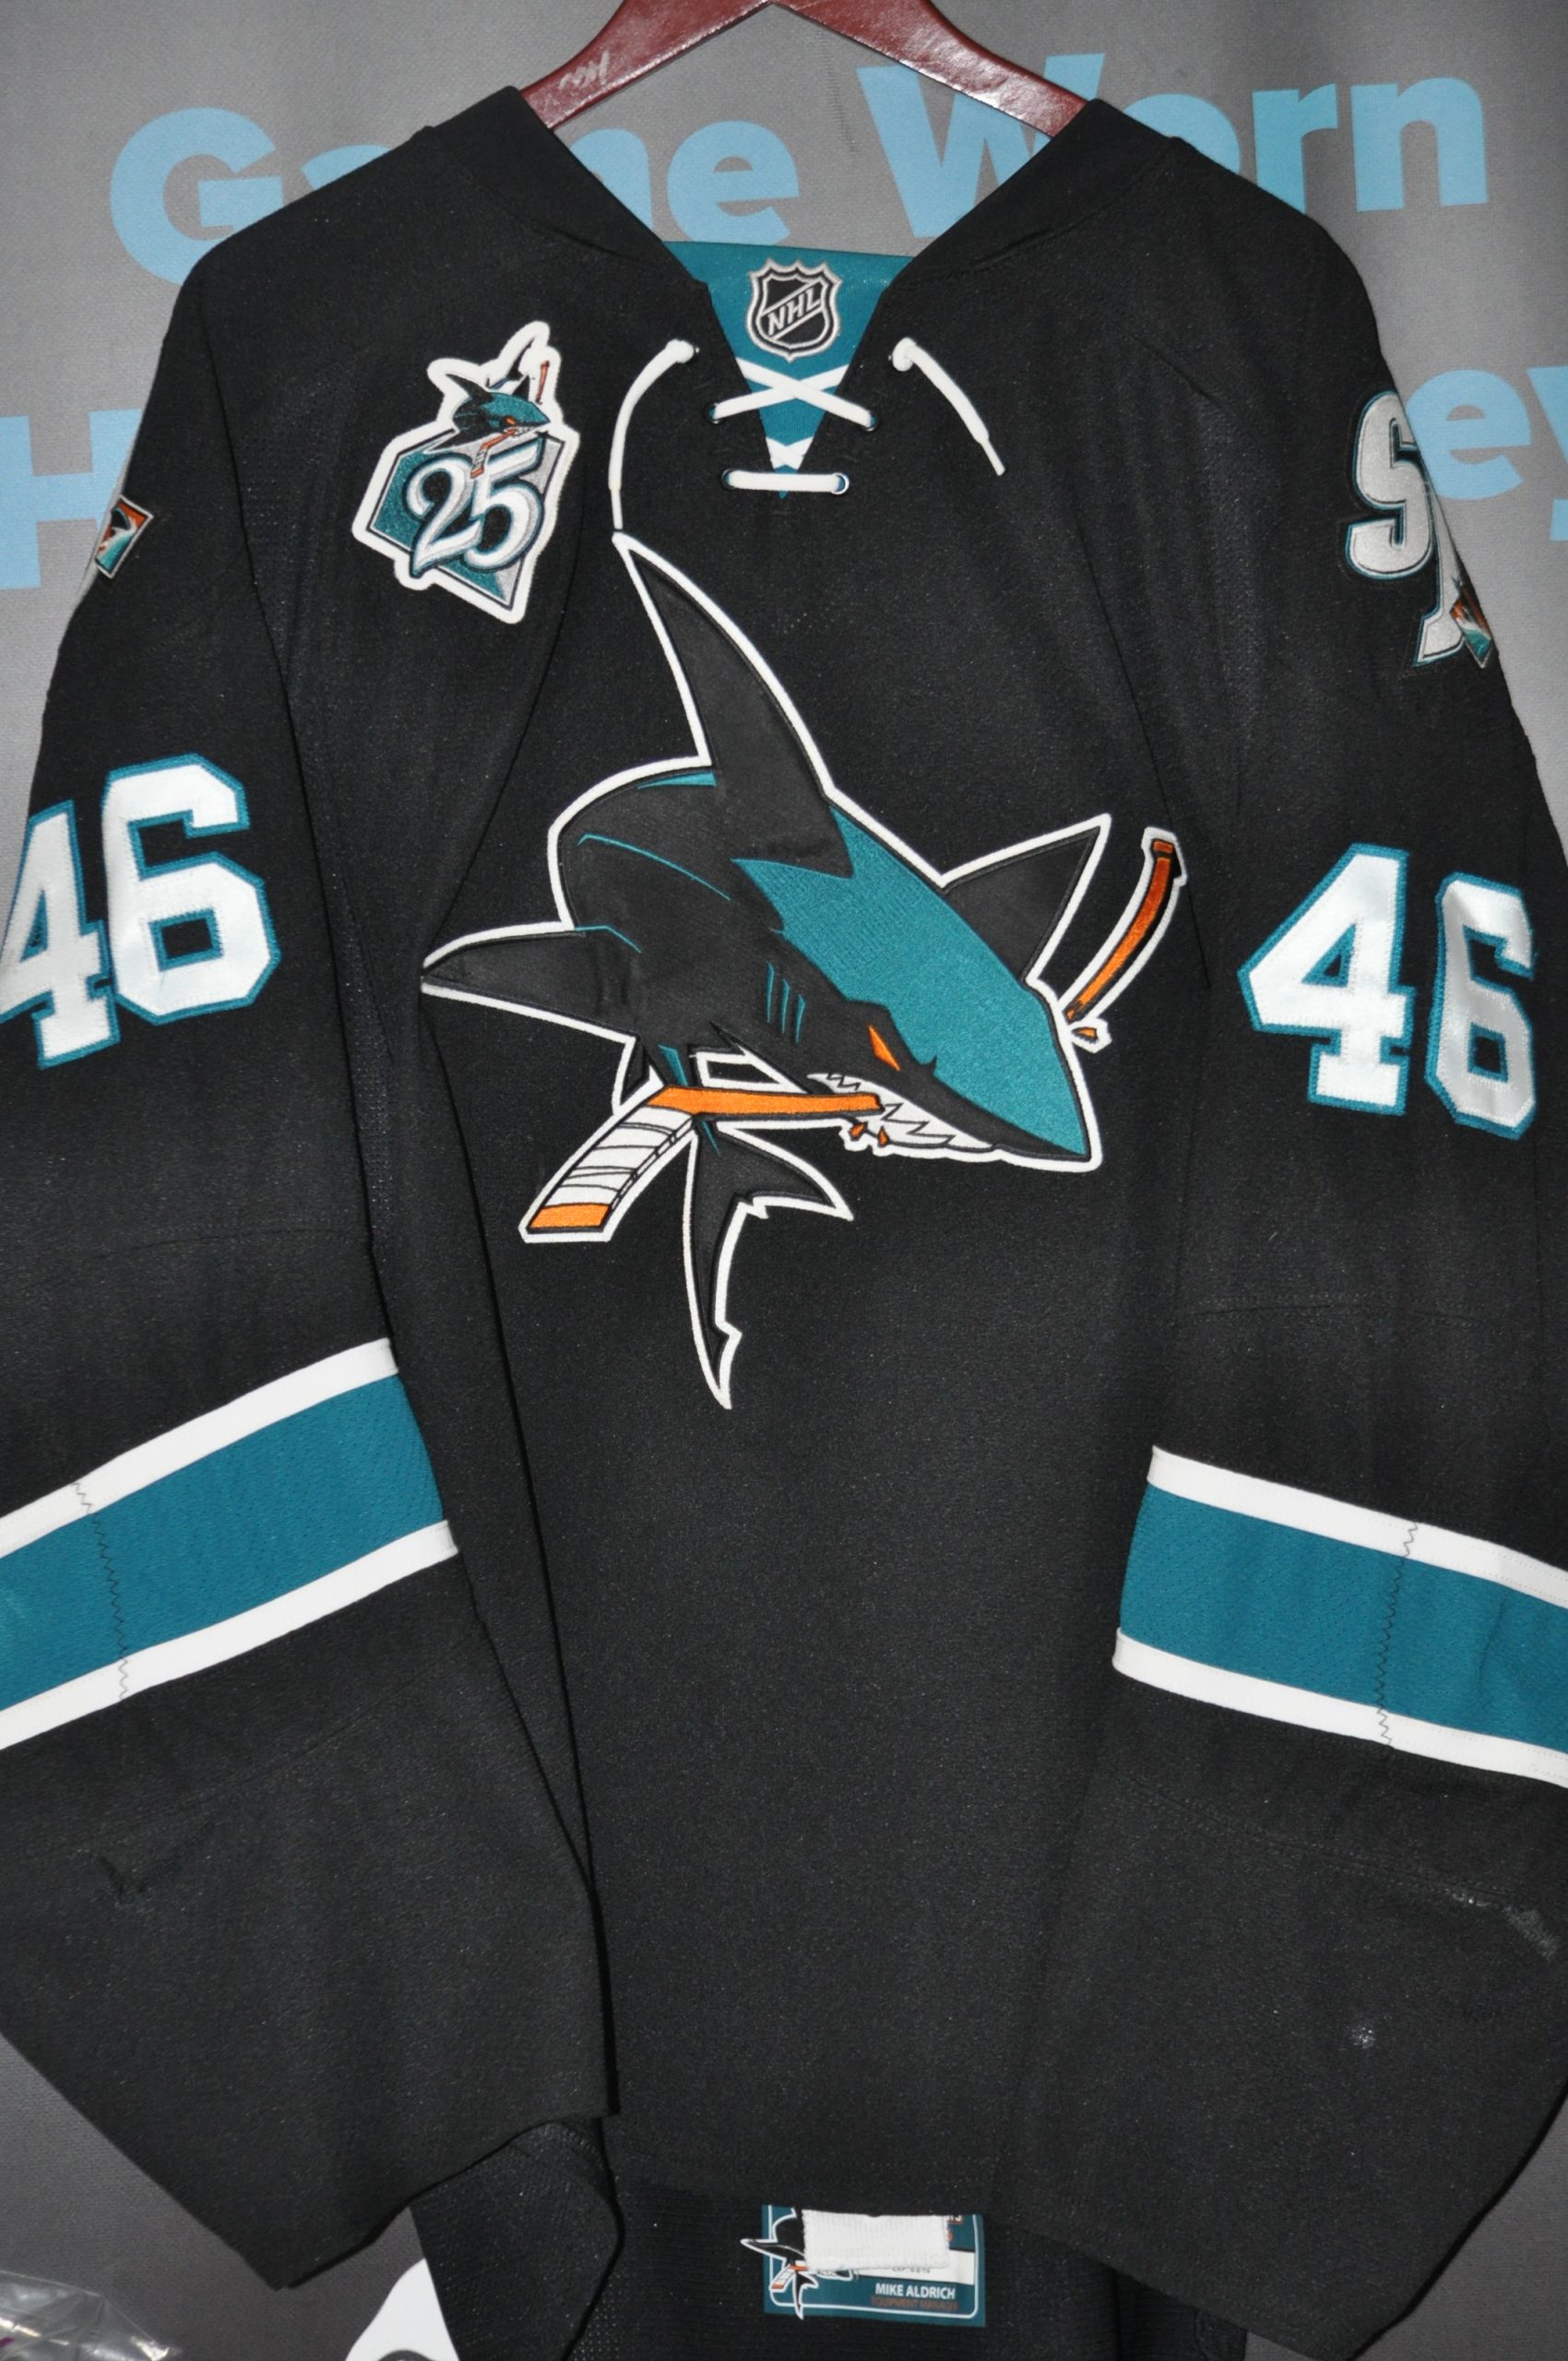 2015-2016 San Jose Sharks Roman Polak Game Worn jersey. 25th Year  Anniversary Patch. “No Longer in Collection” – Hockey Jersey